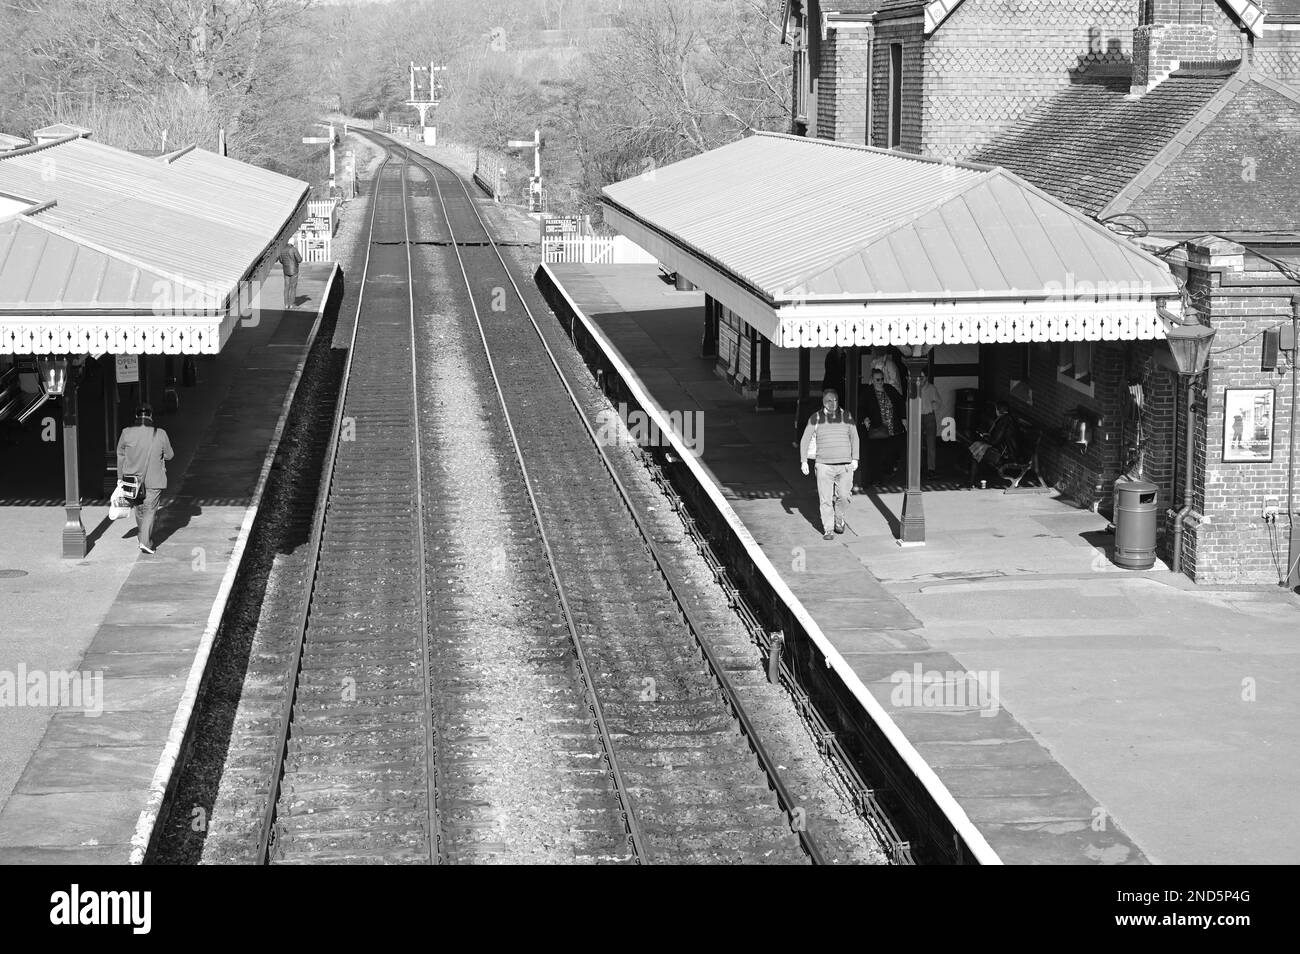 Sheffield Park Victorian station in the UK on a cold winters morning. Stock Photo